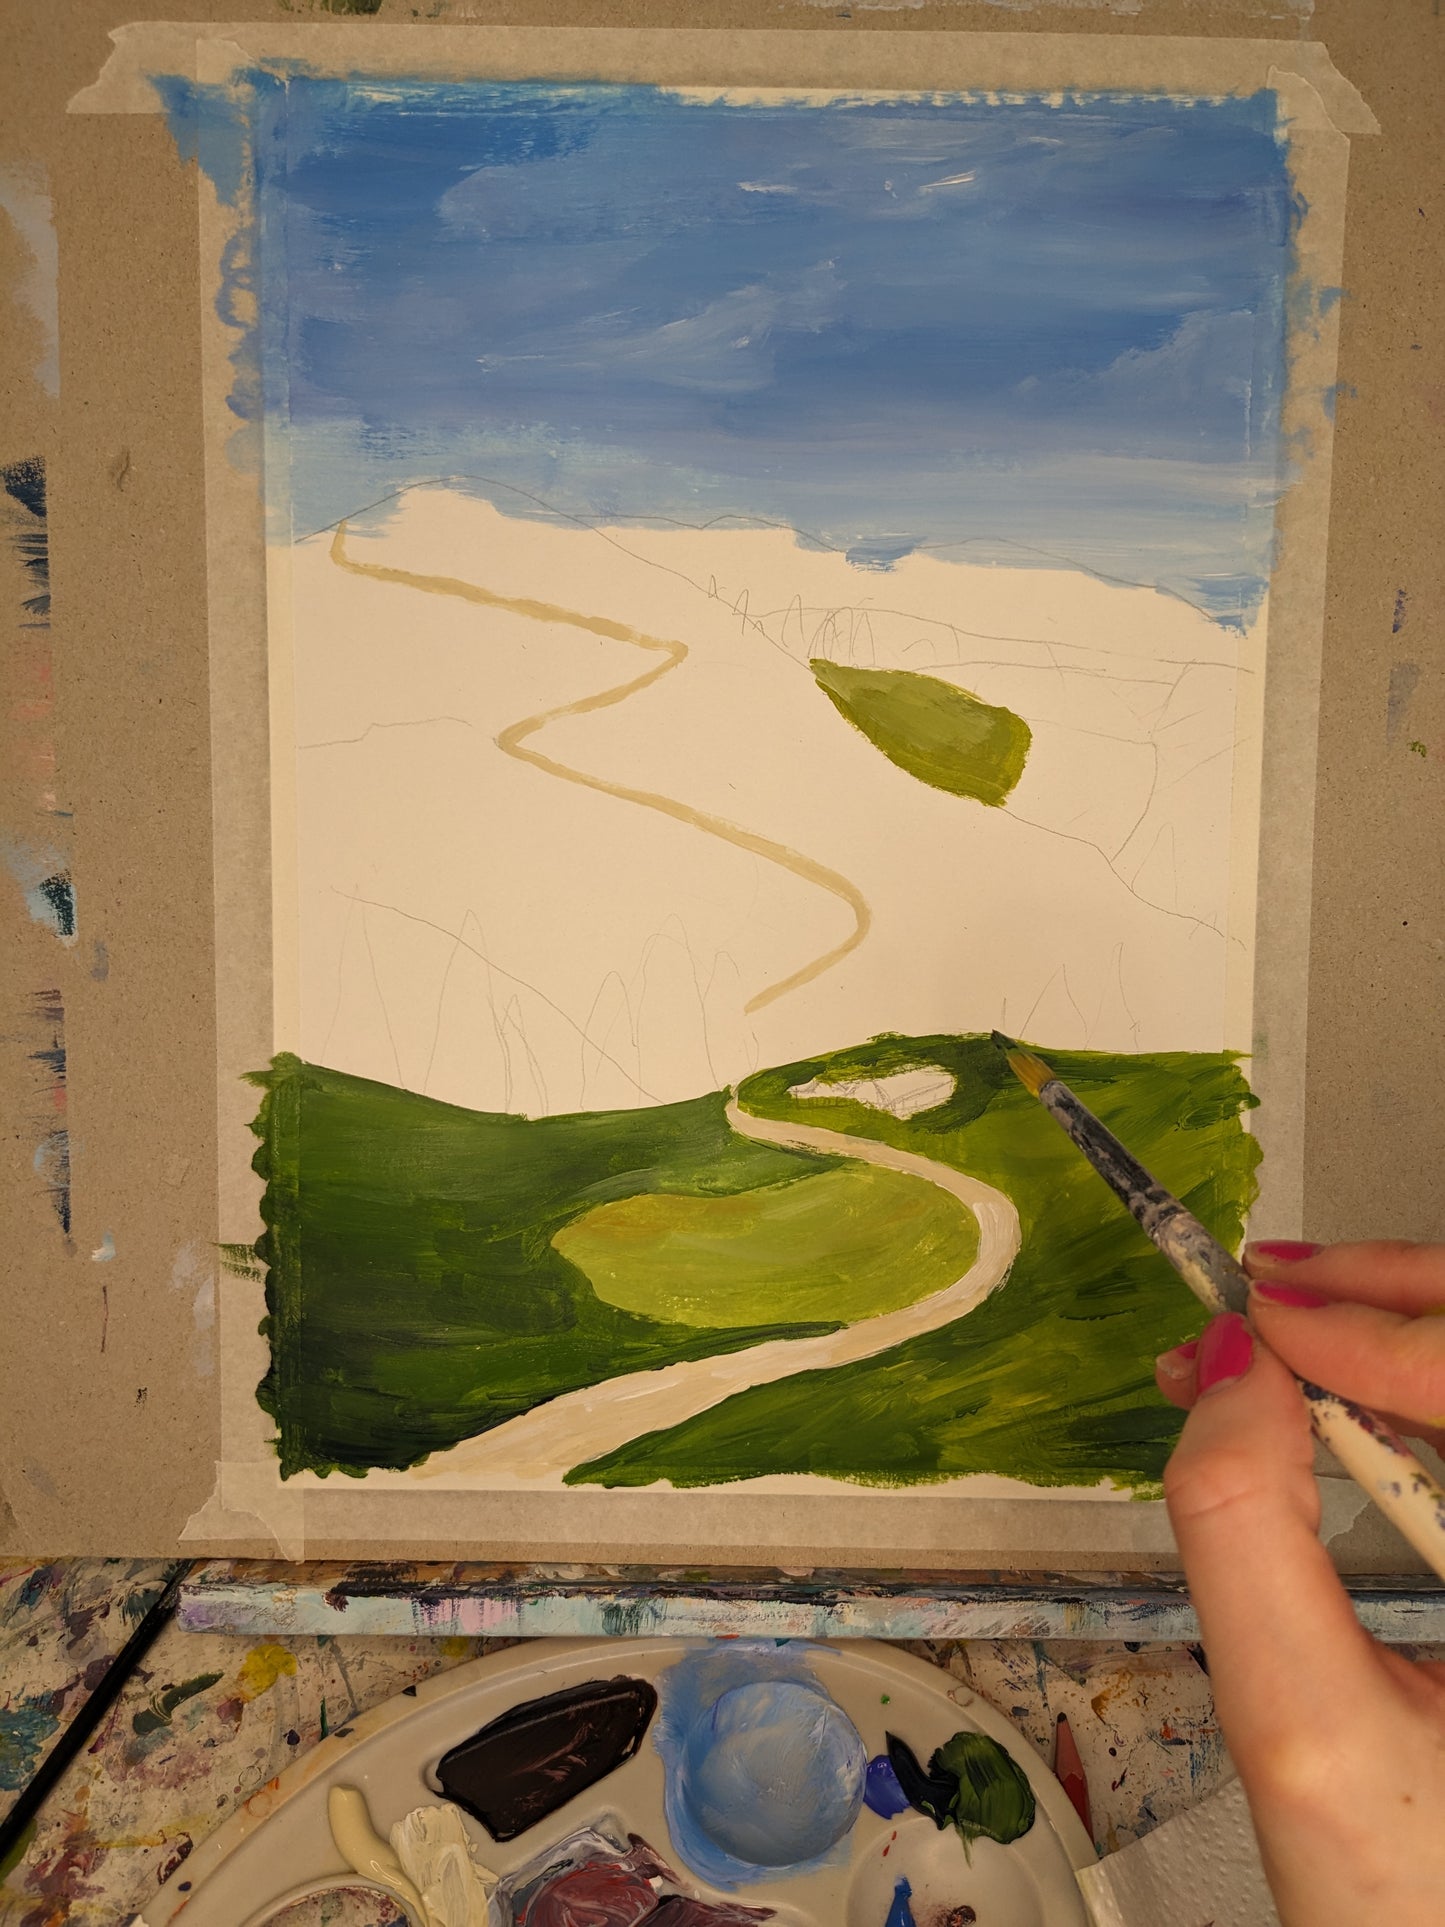 ENGLISH COUNTRYSIDE - Painting Workshop